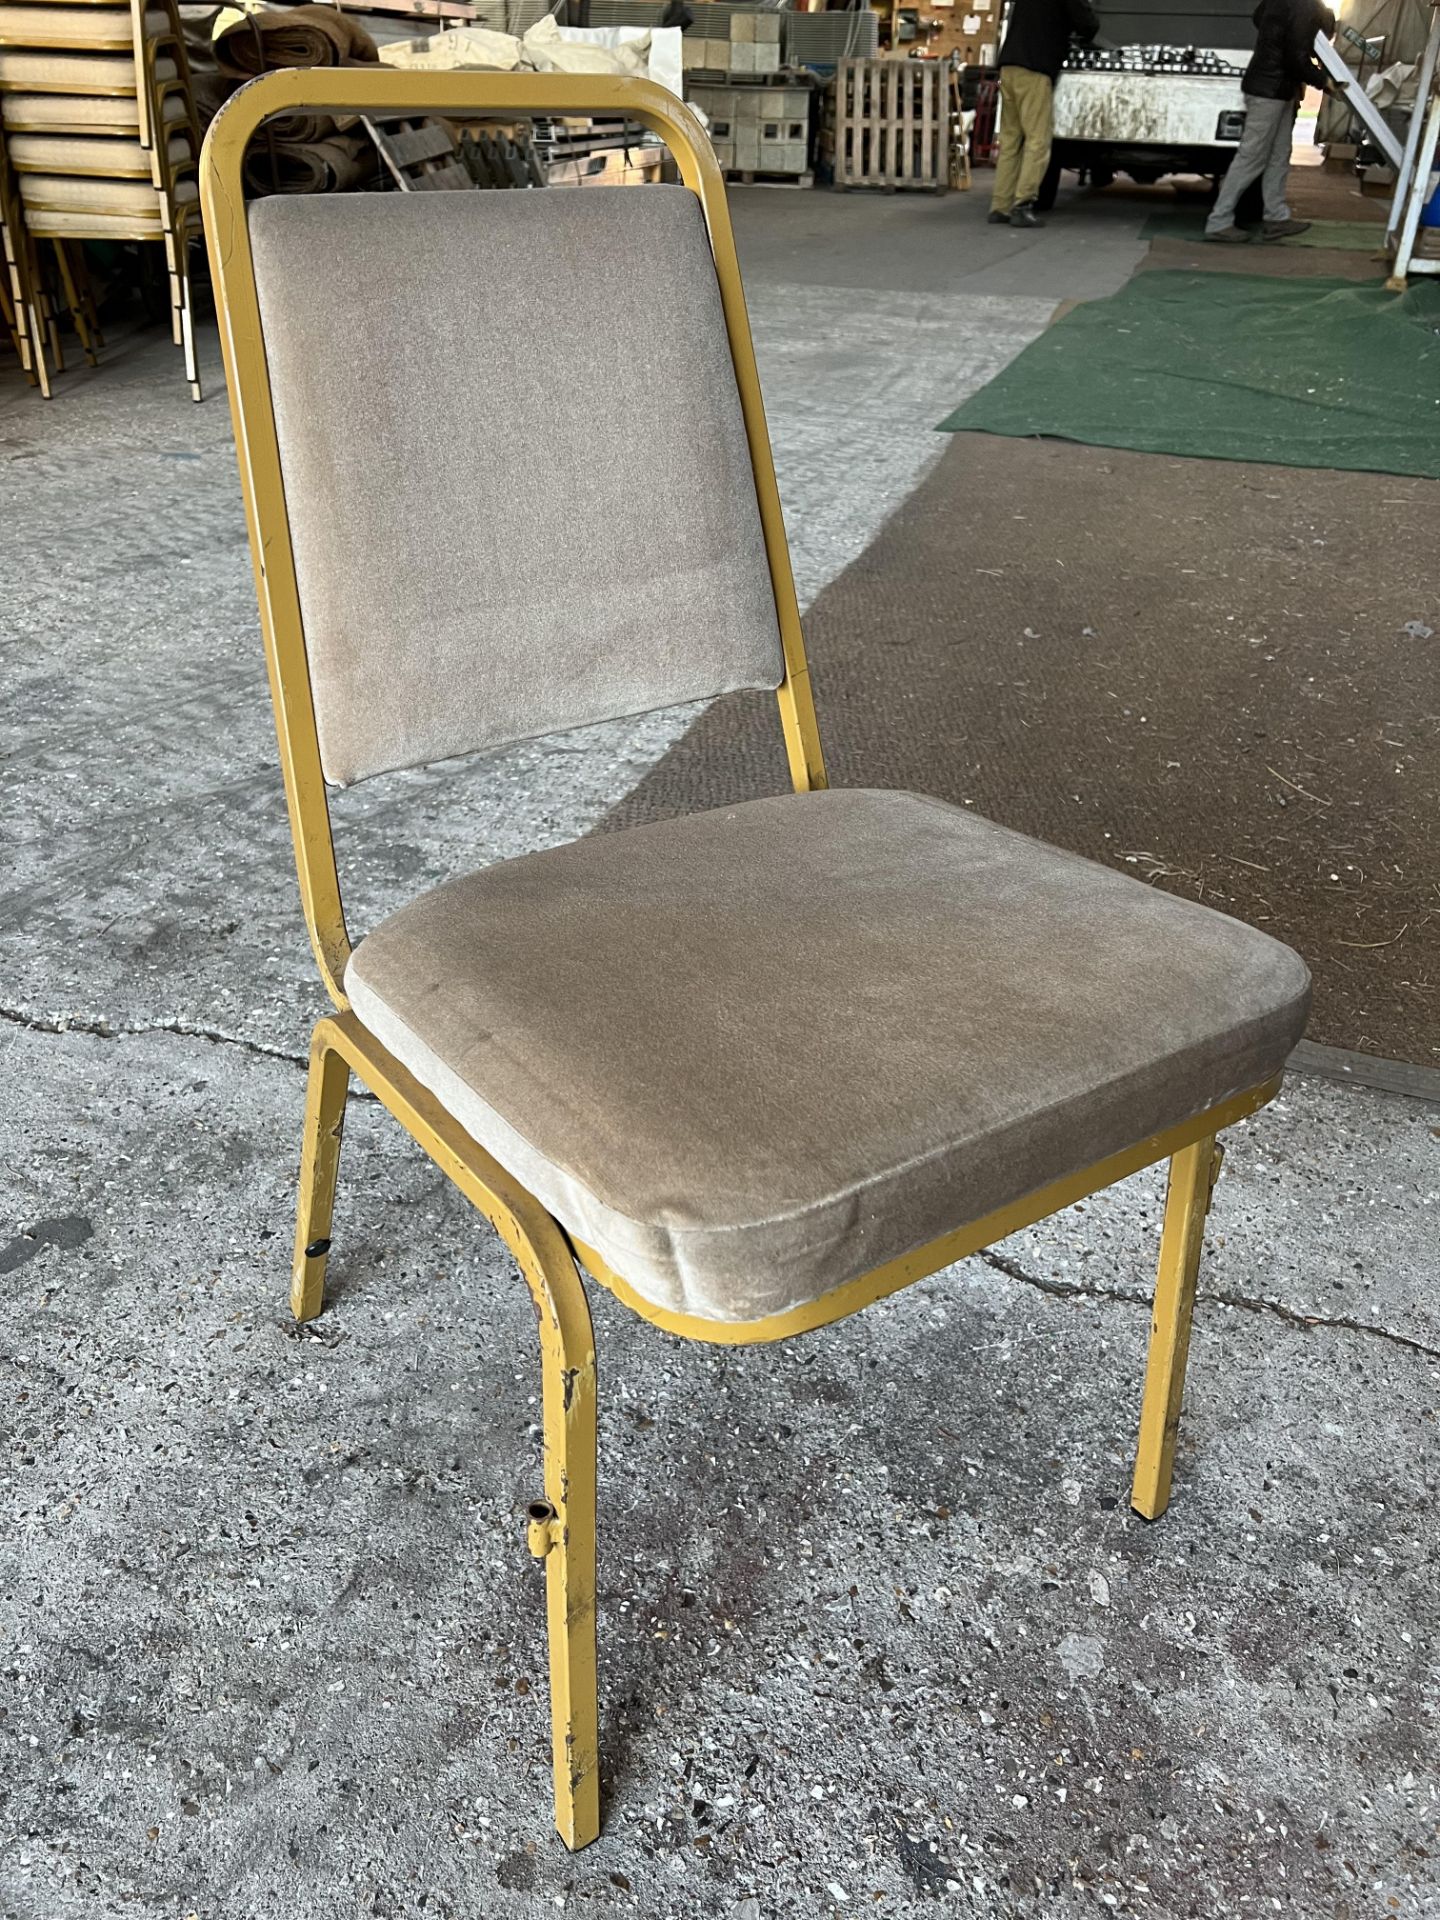 Approx 100 banquet chairs with beige seat and back. This lot is subject to VAT